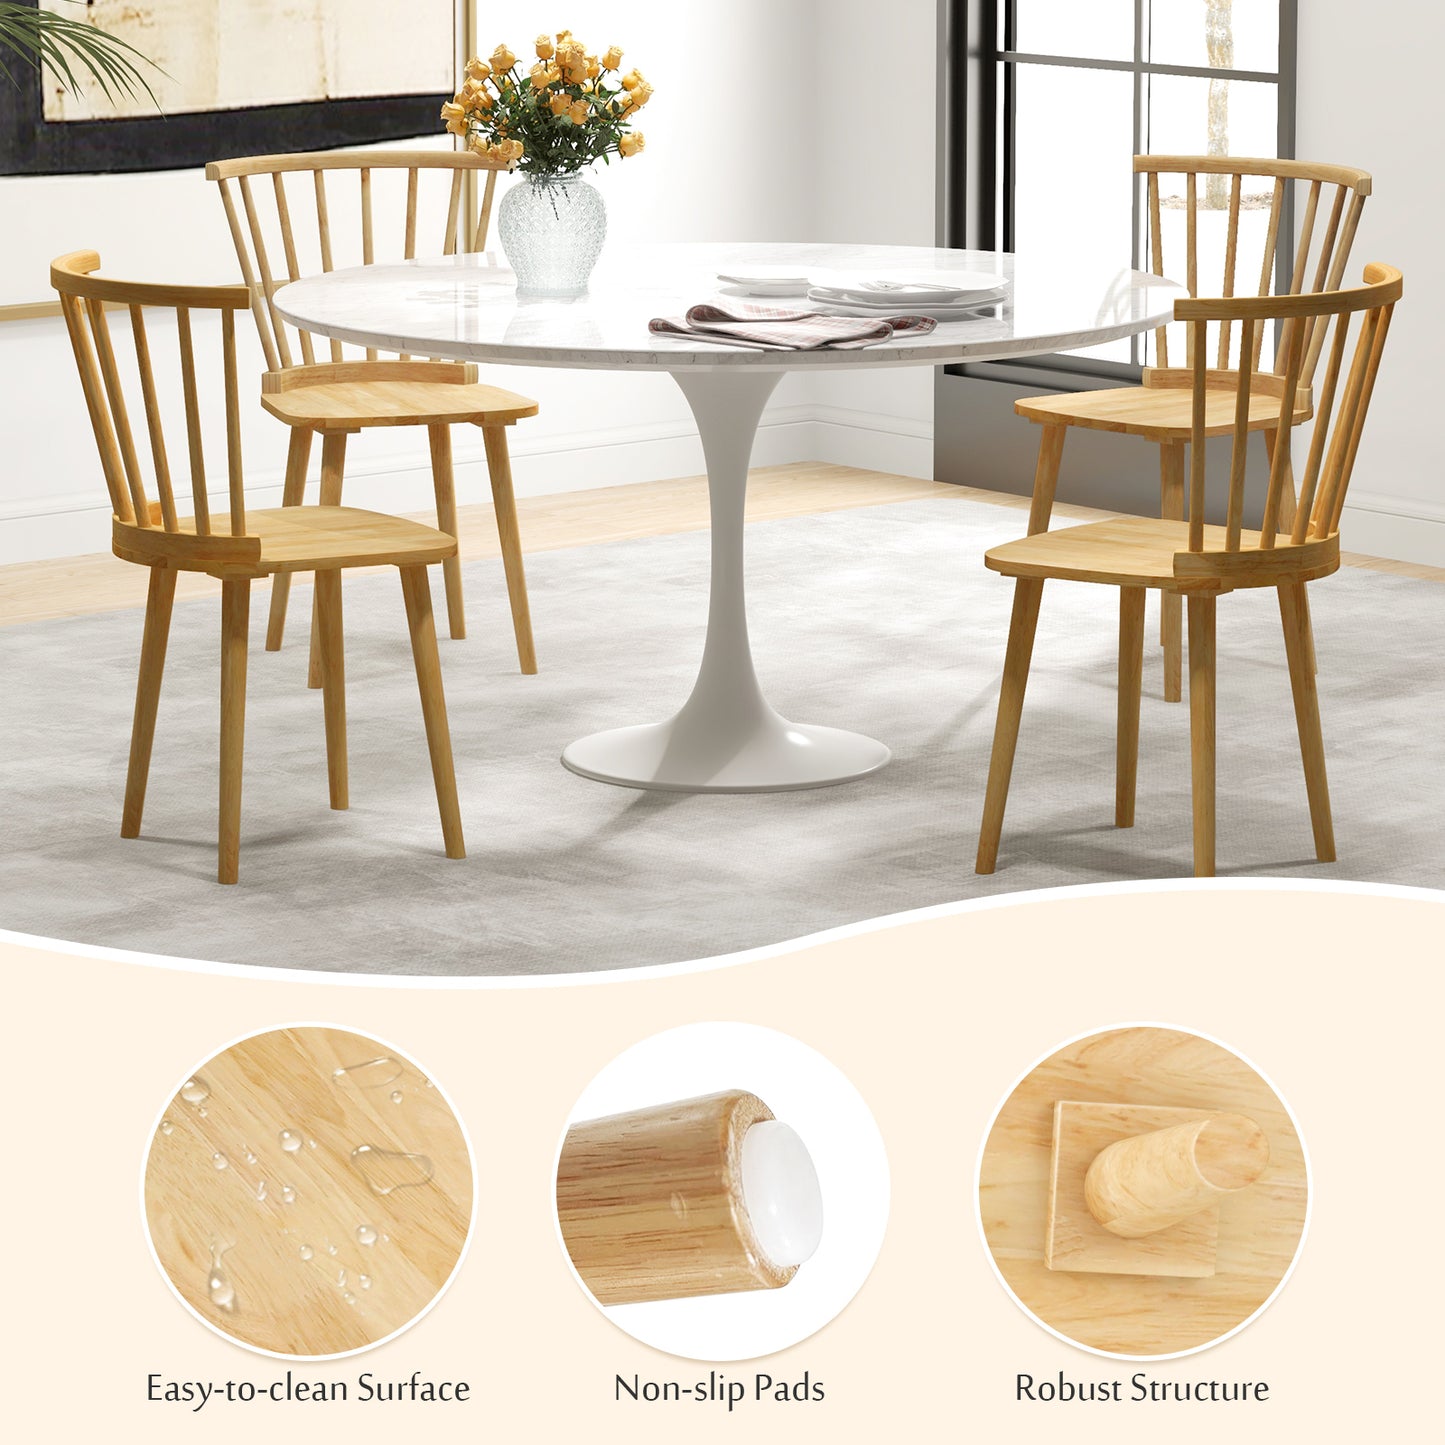 Windsor Dining Chairs Set of 2 Rubber Wood Kitchen Chairs with Spindle Back-Natural